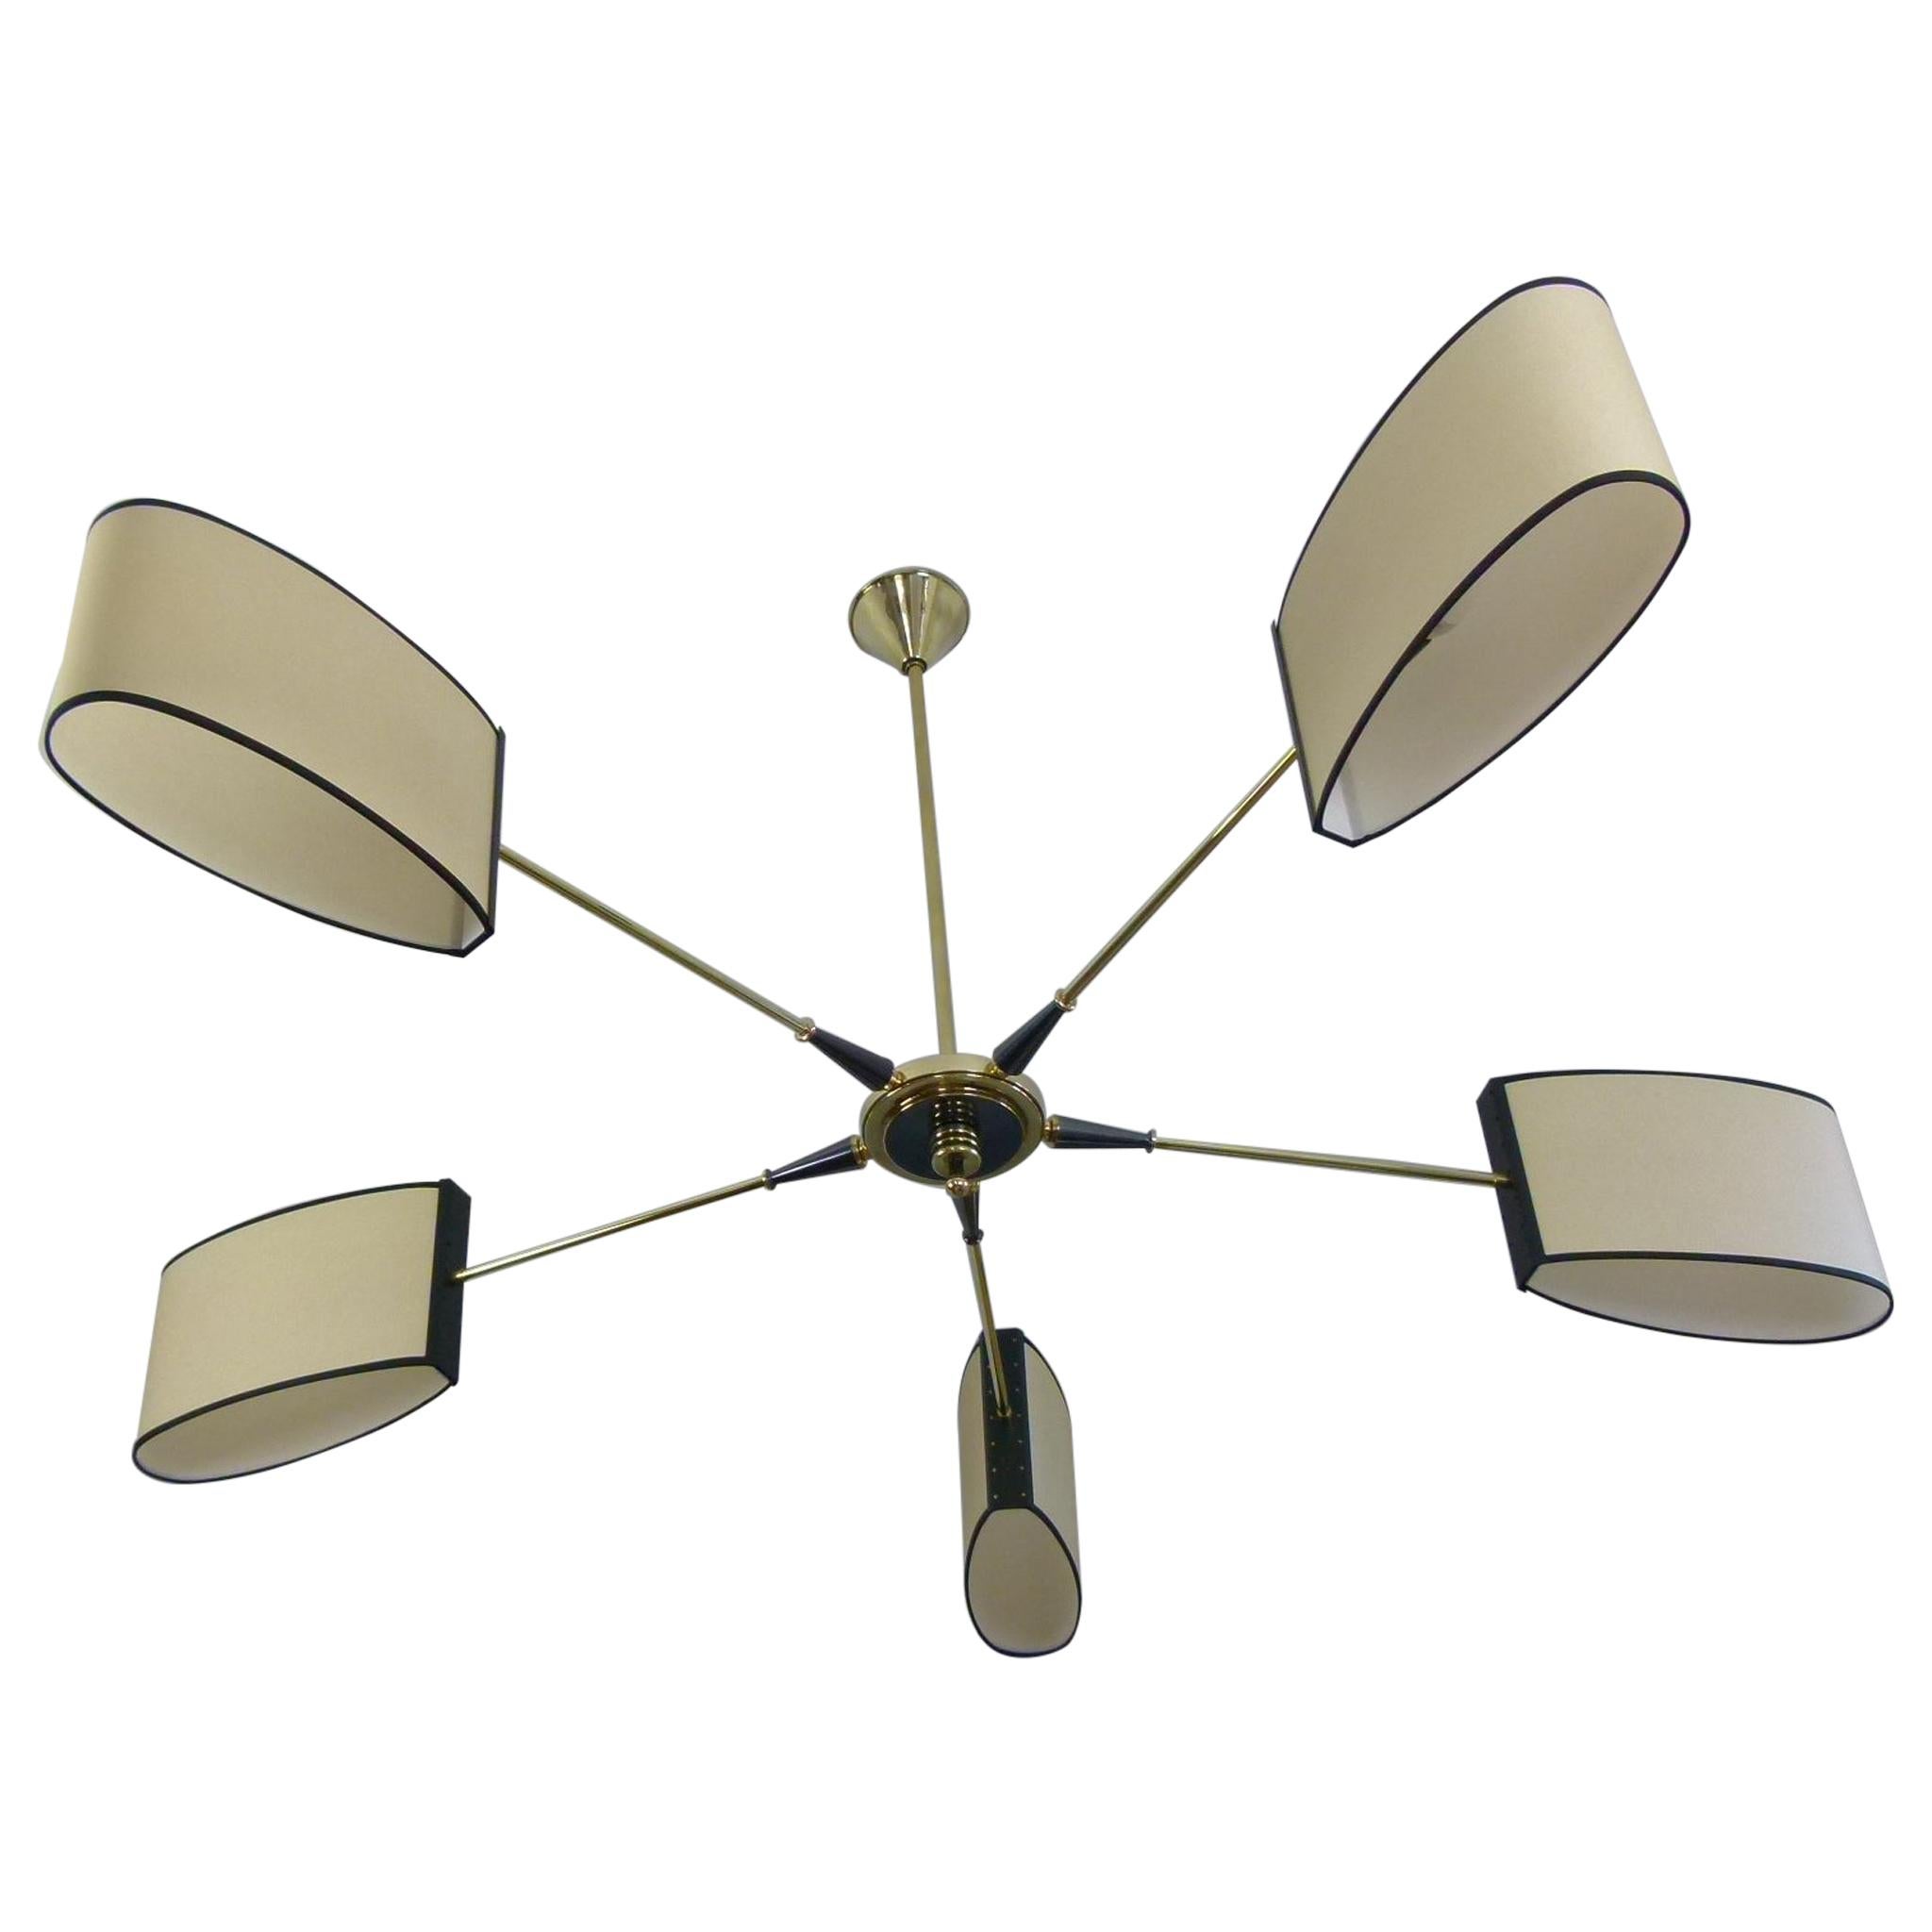 1950s Circular Five-Lighted Arms Chandelier by Maison Lunel